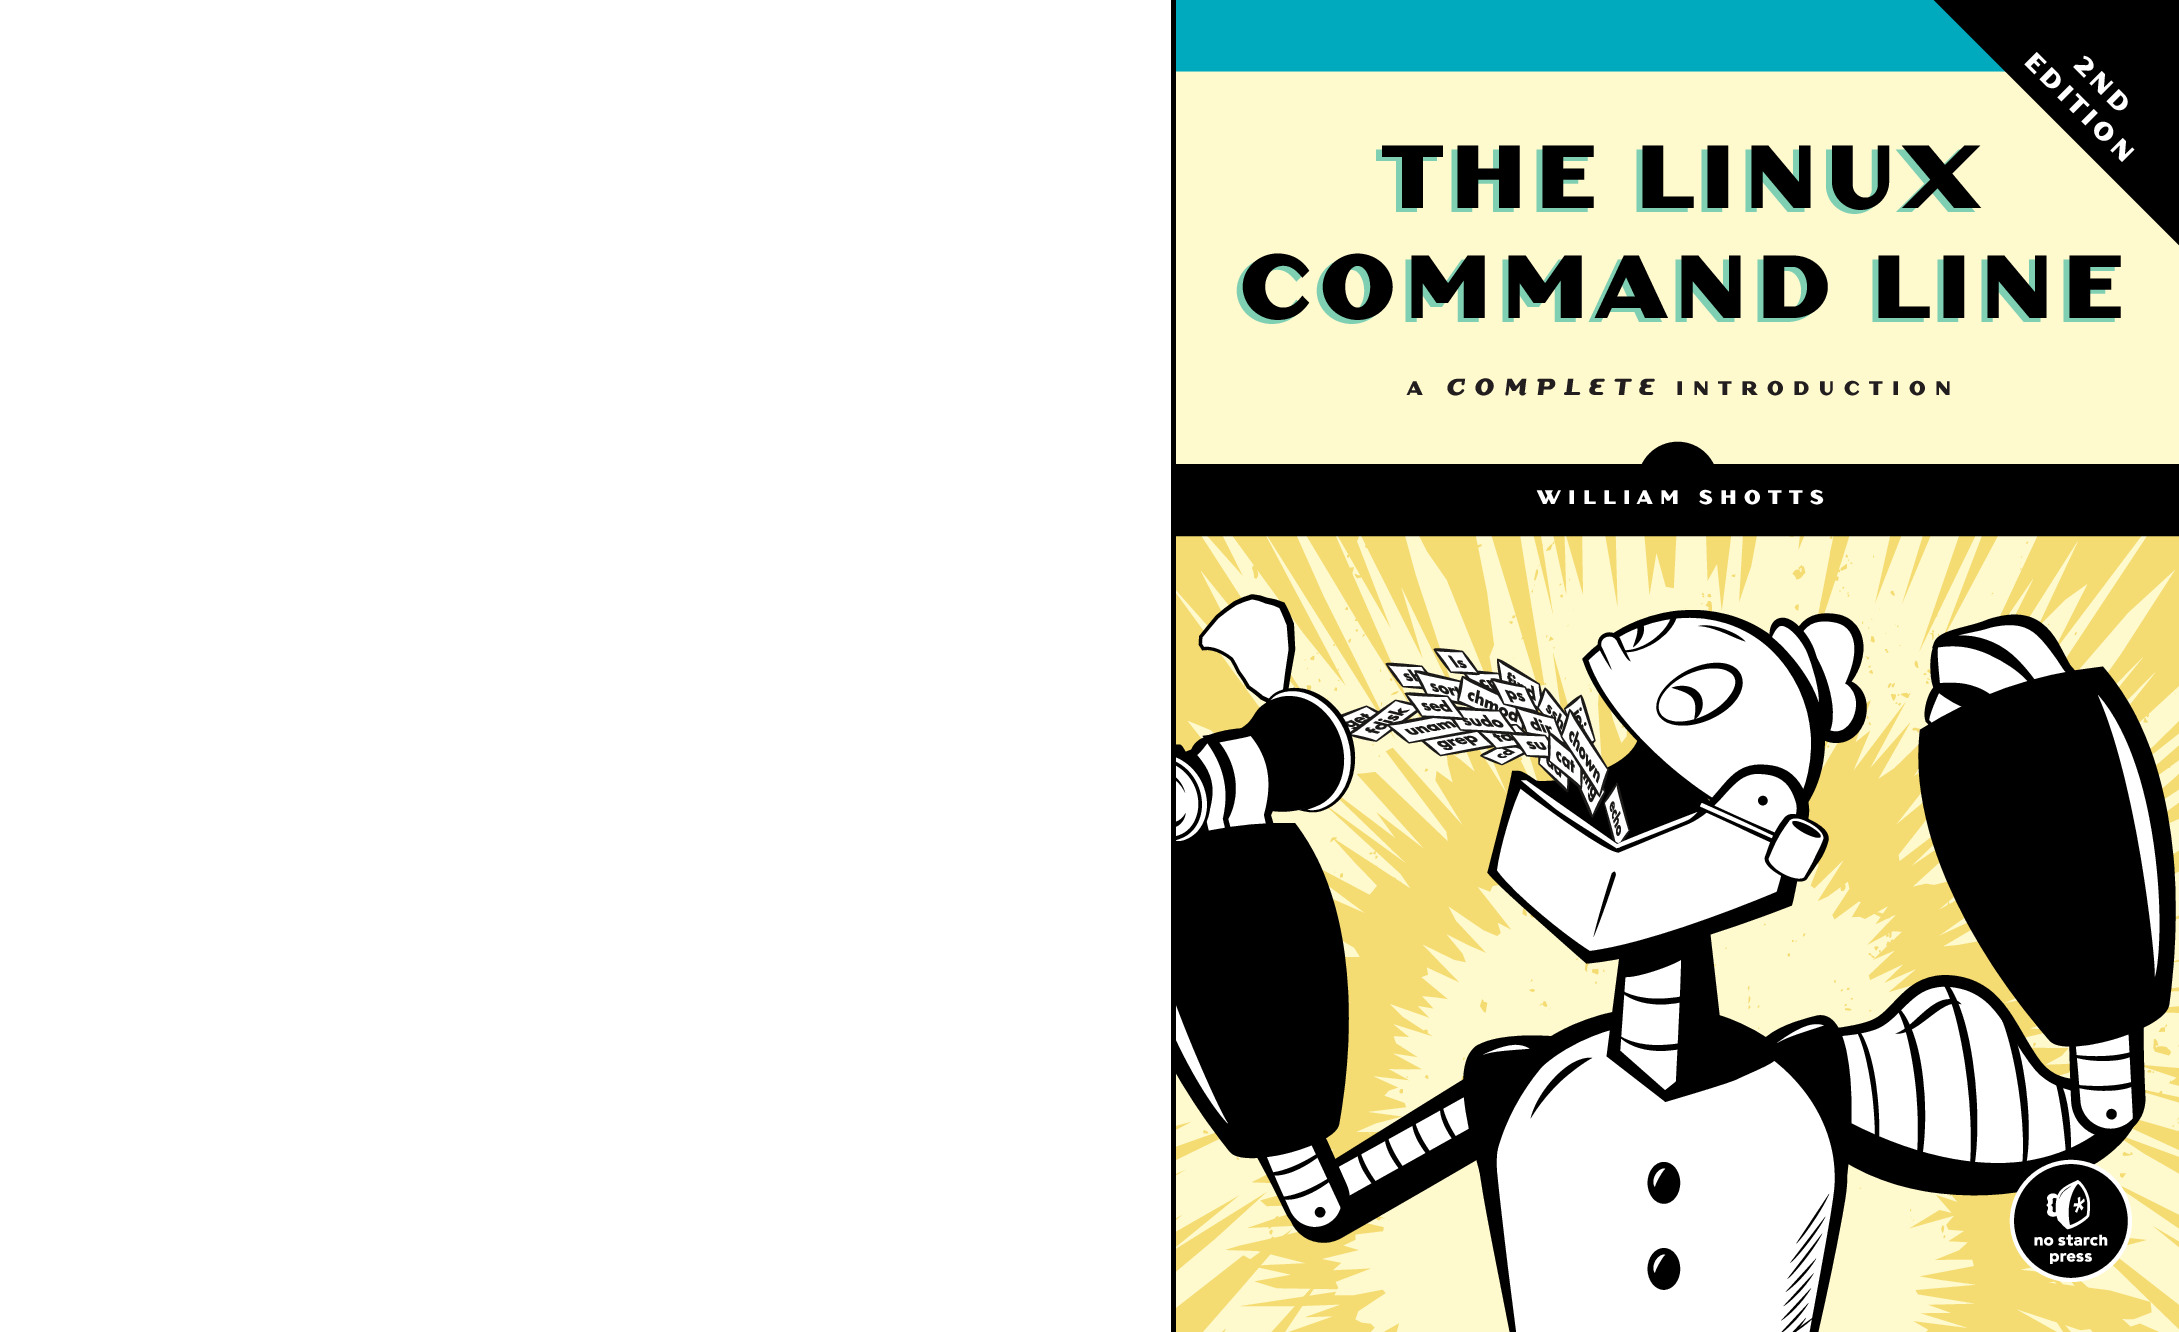 The Linux Command Line A Complete Introduction by William E. Shotts (z-lib.org)